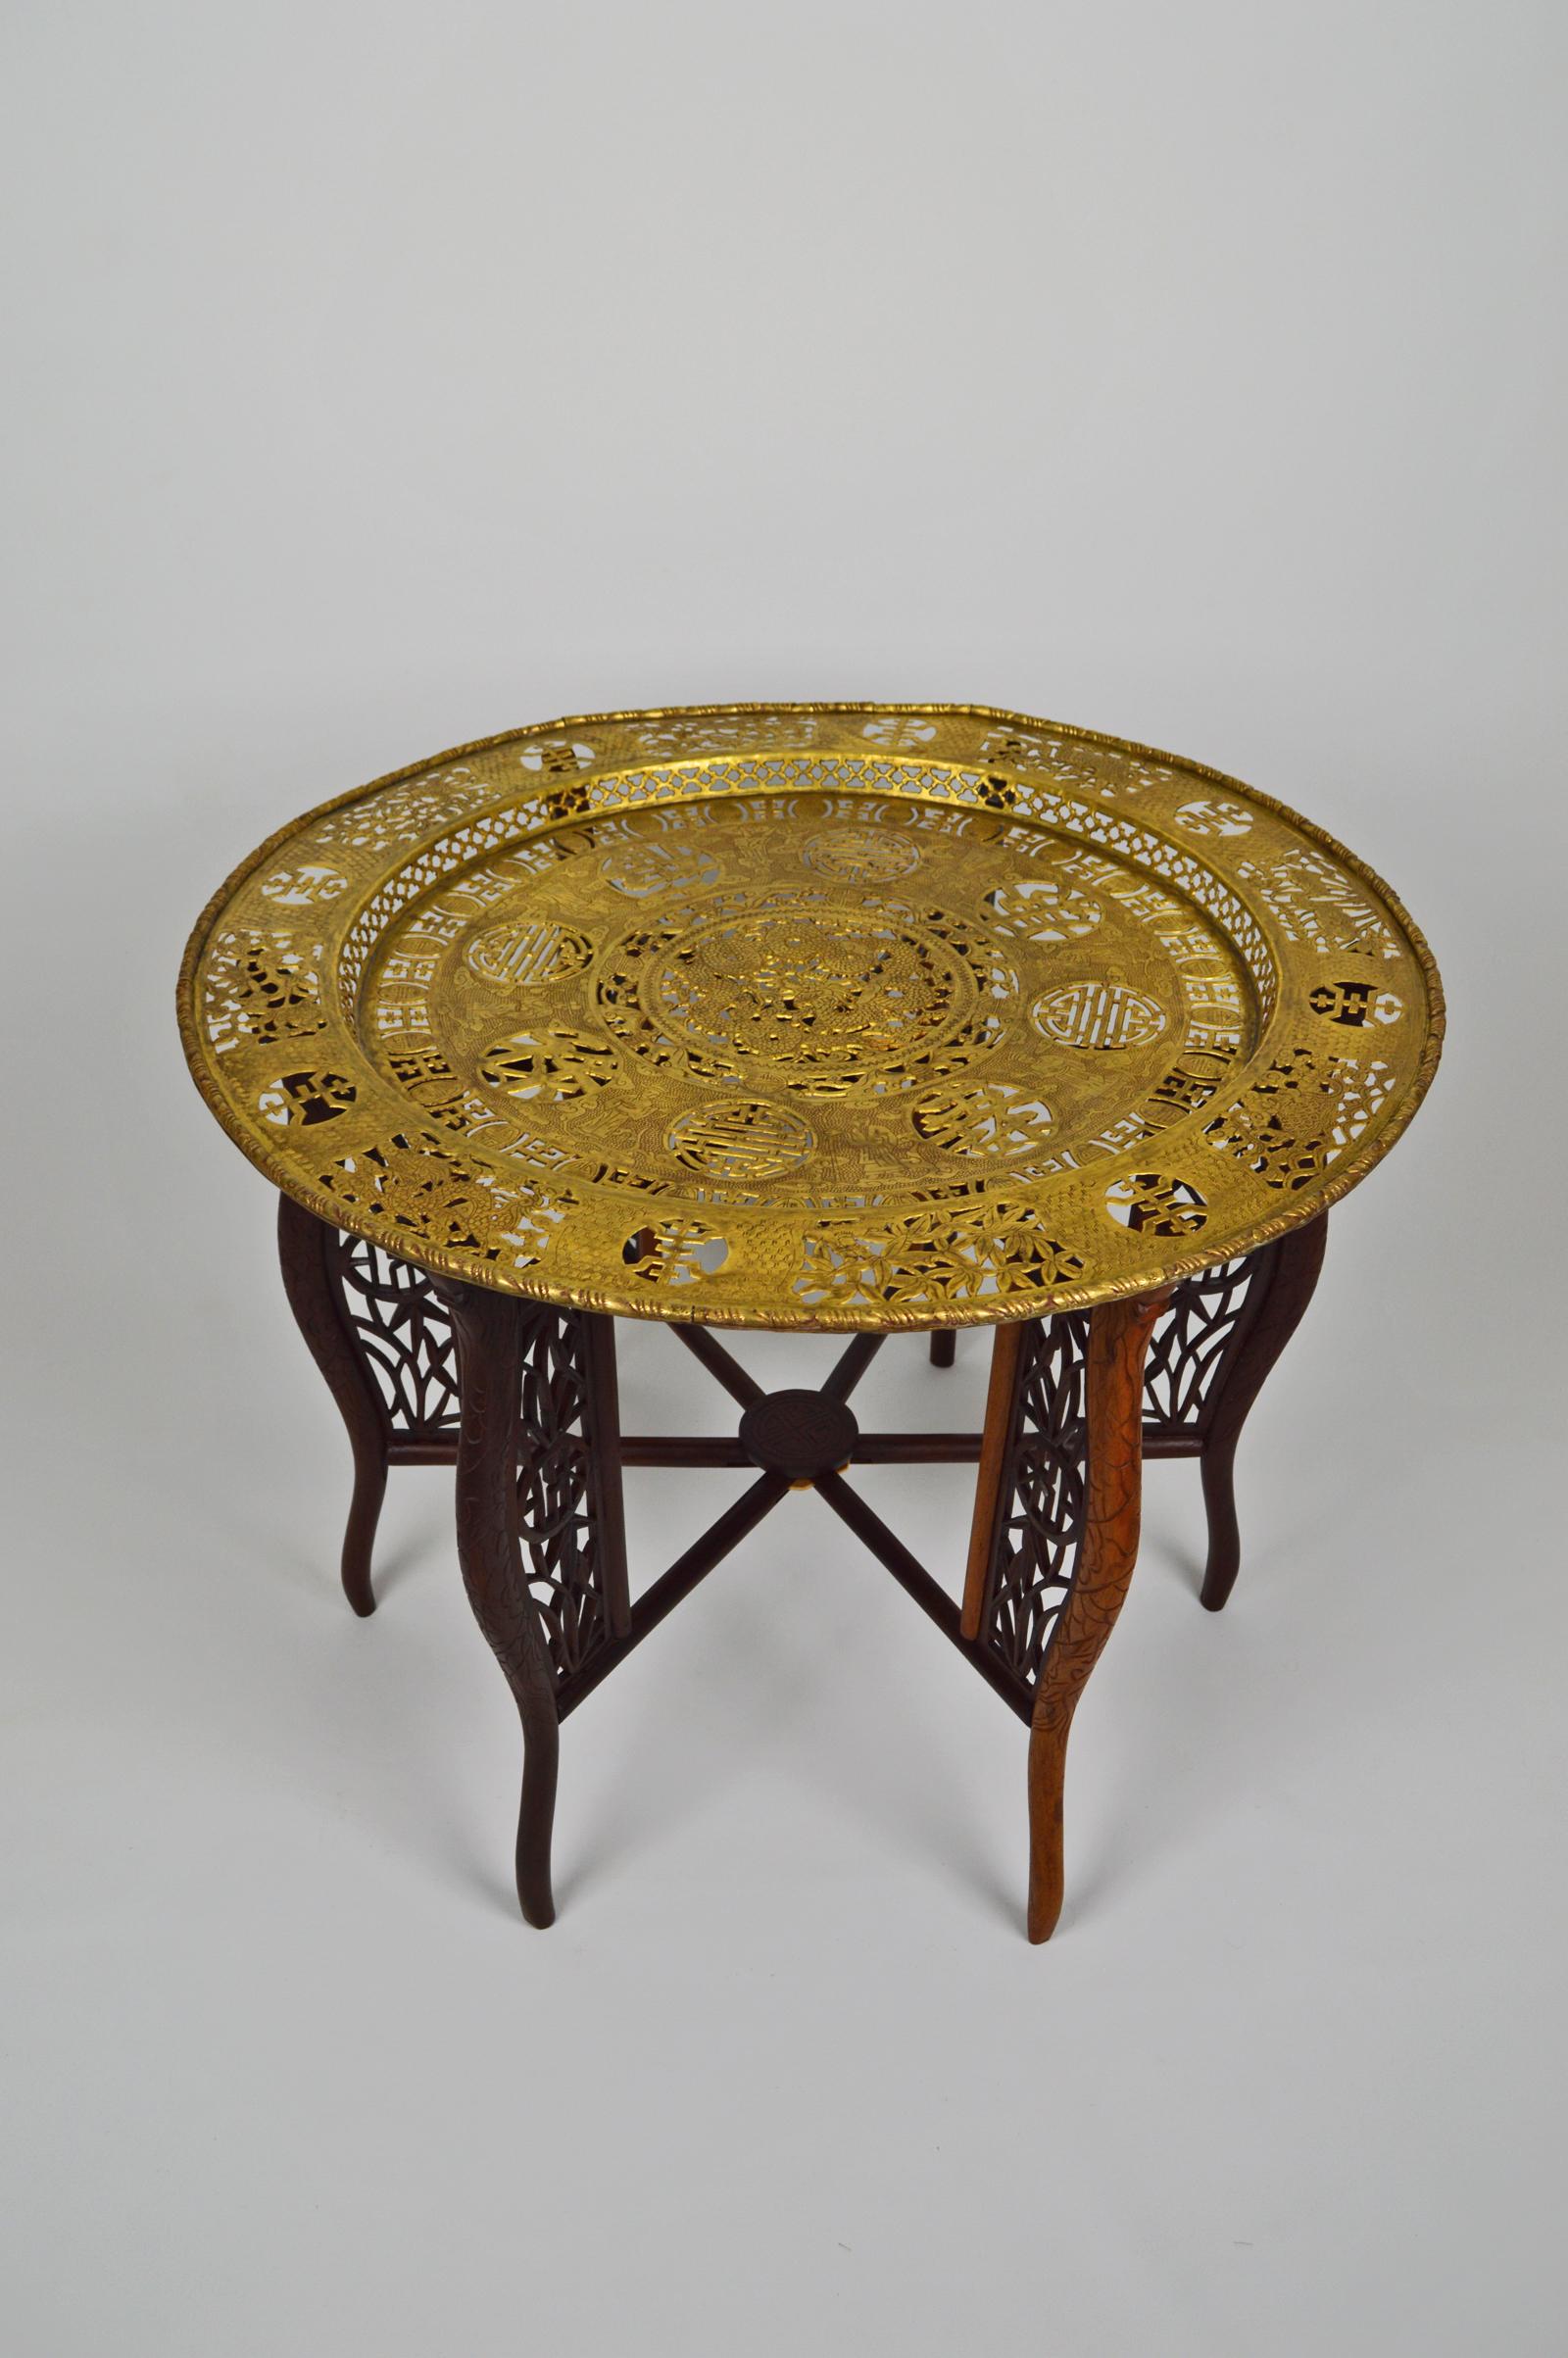 Japonisme Indochinese Dragons Carved Table with Brassware Tray Top, 1890s For Sale